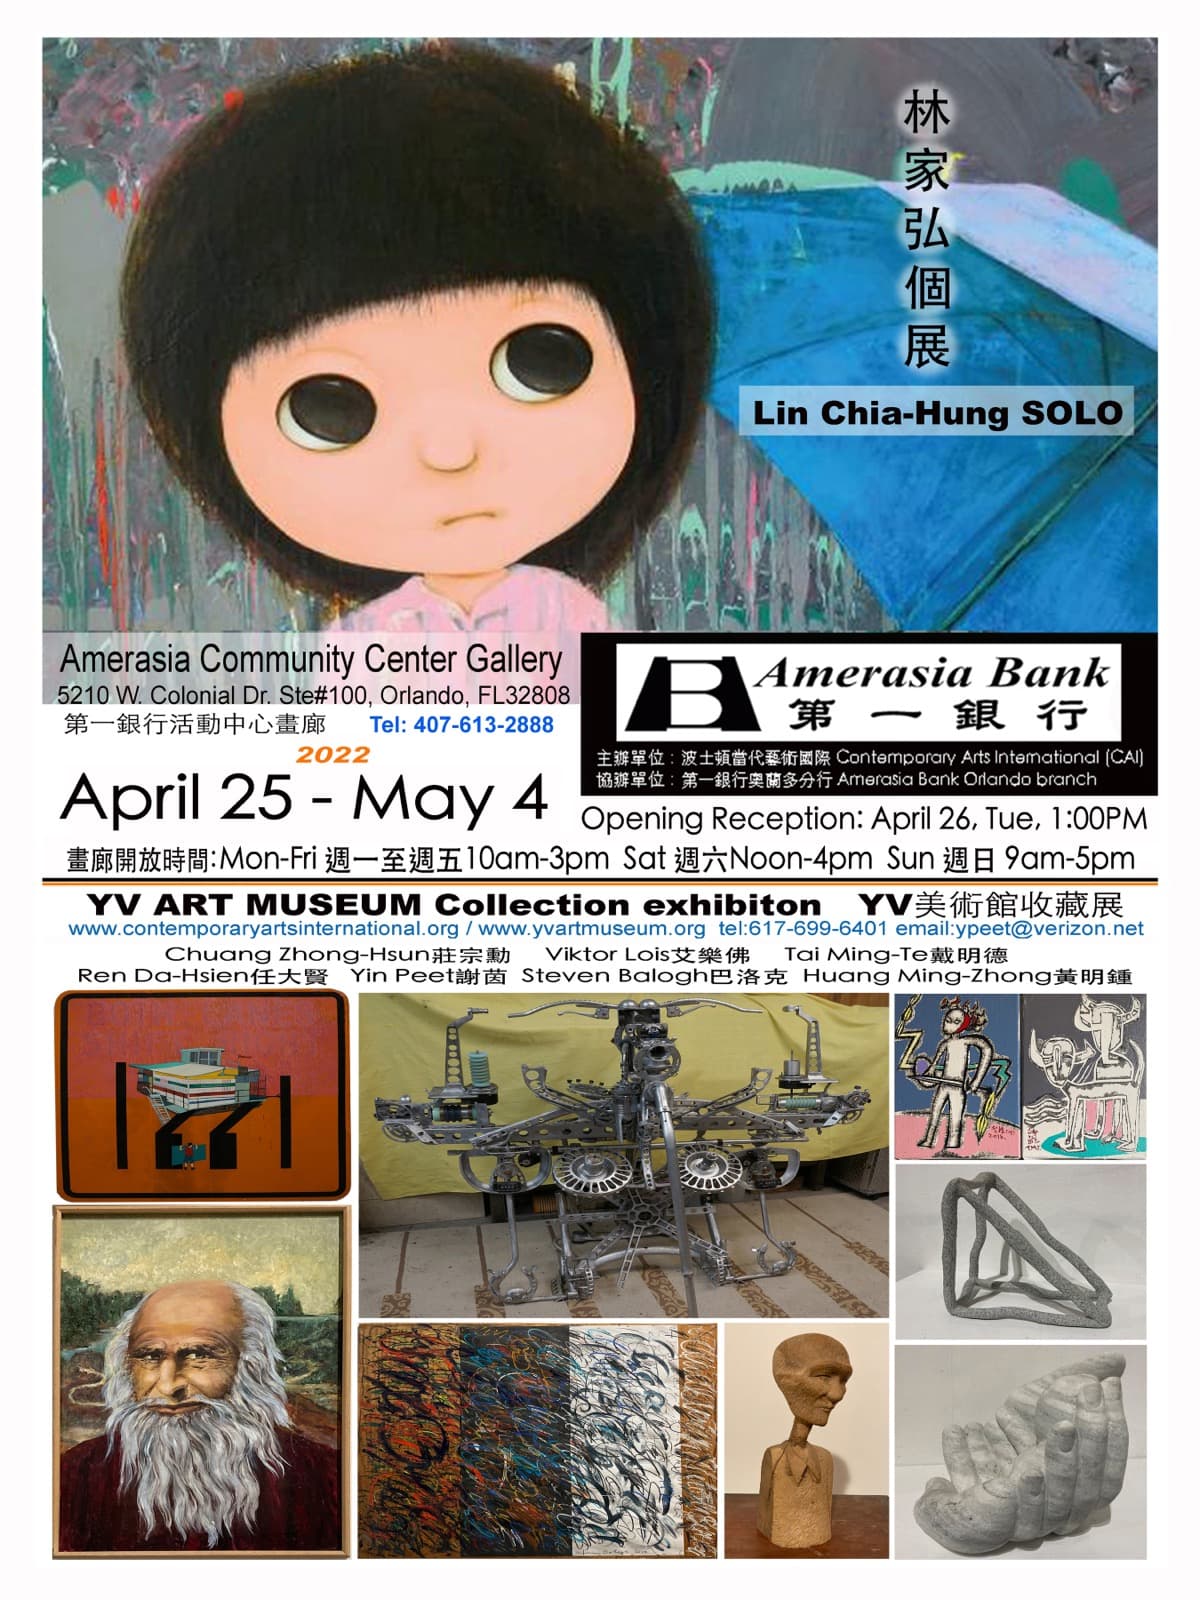 YV Art Museum Collection Exhibition